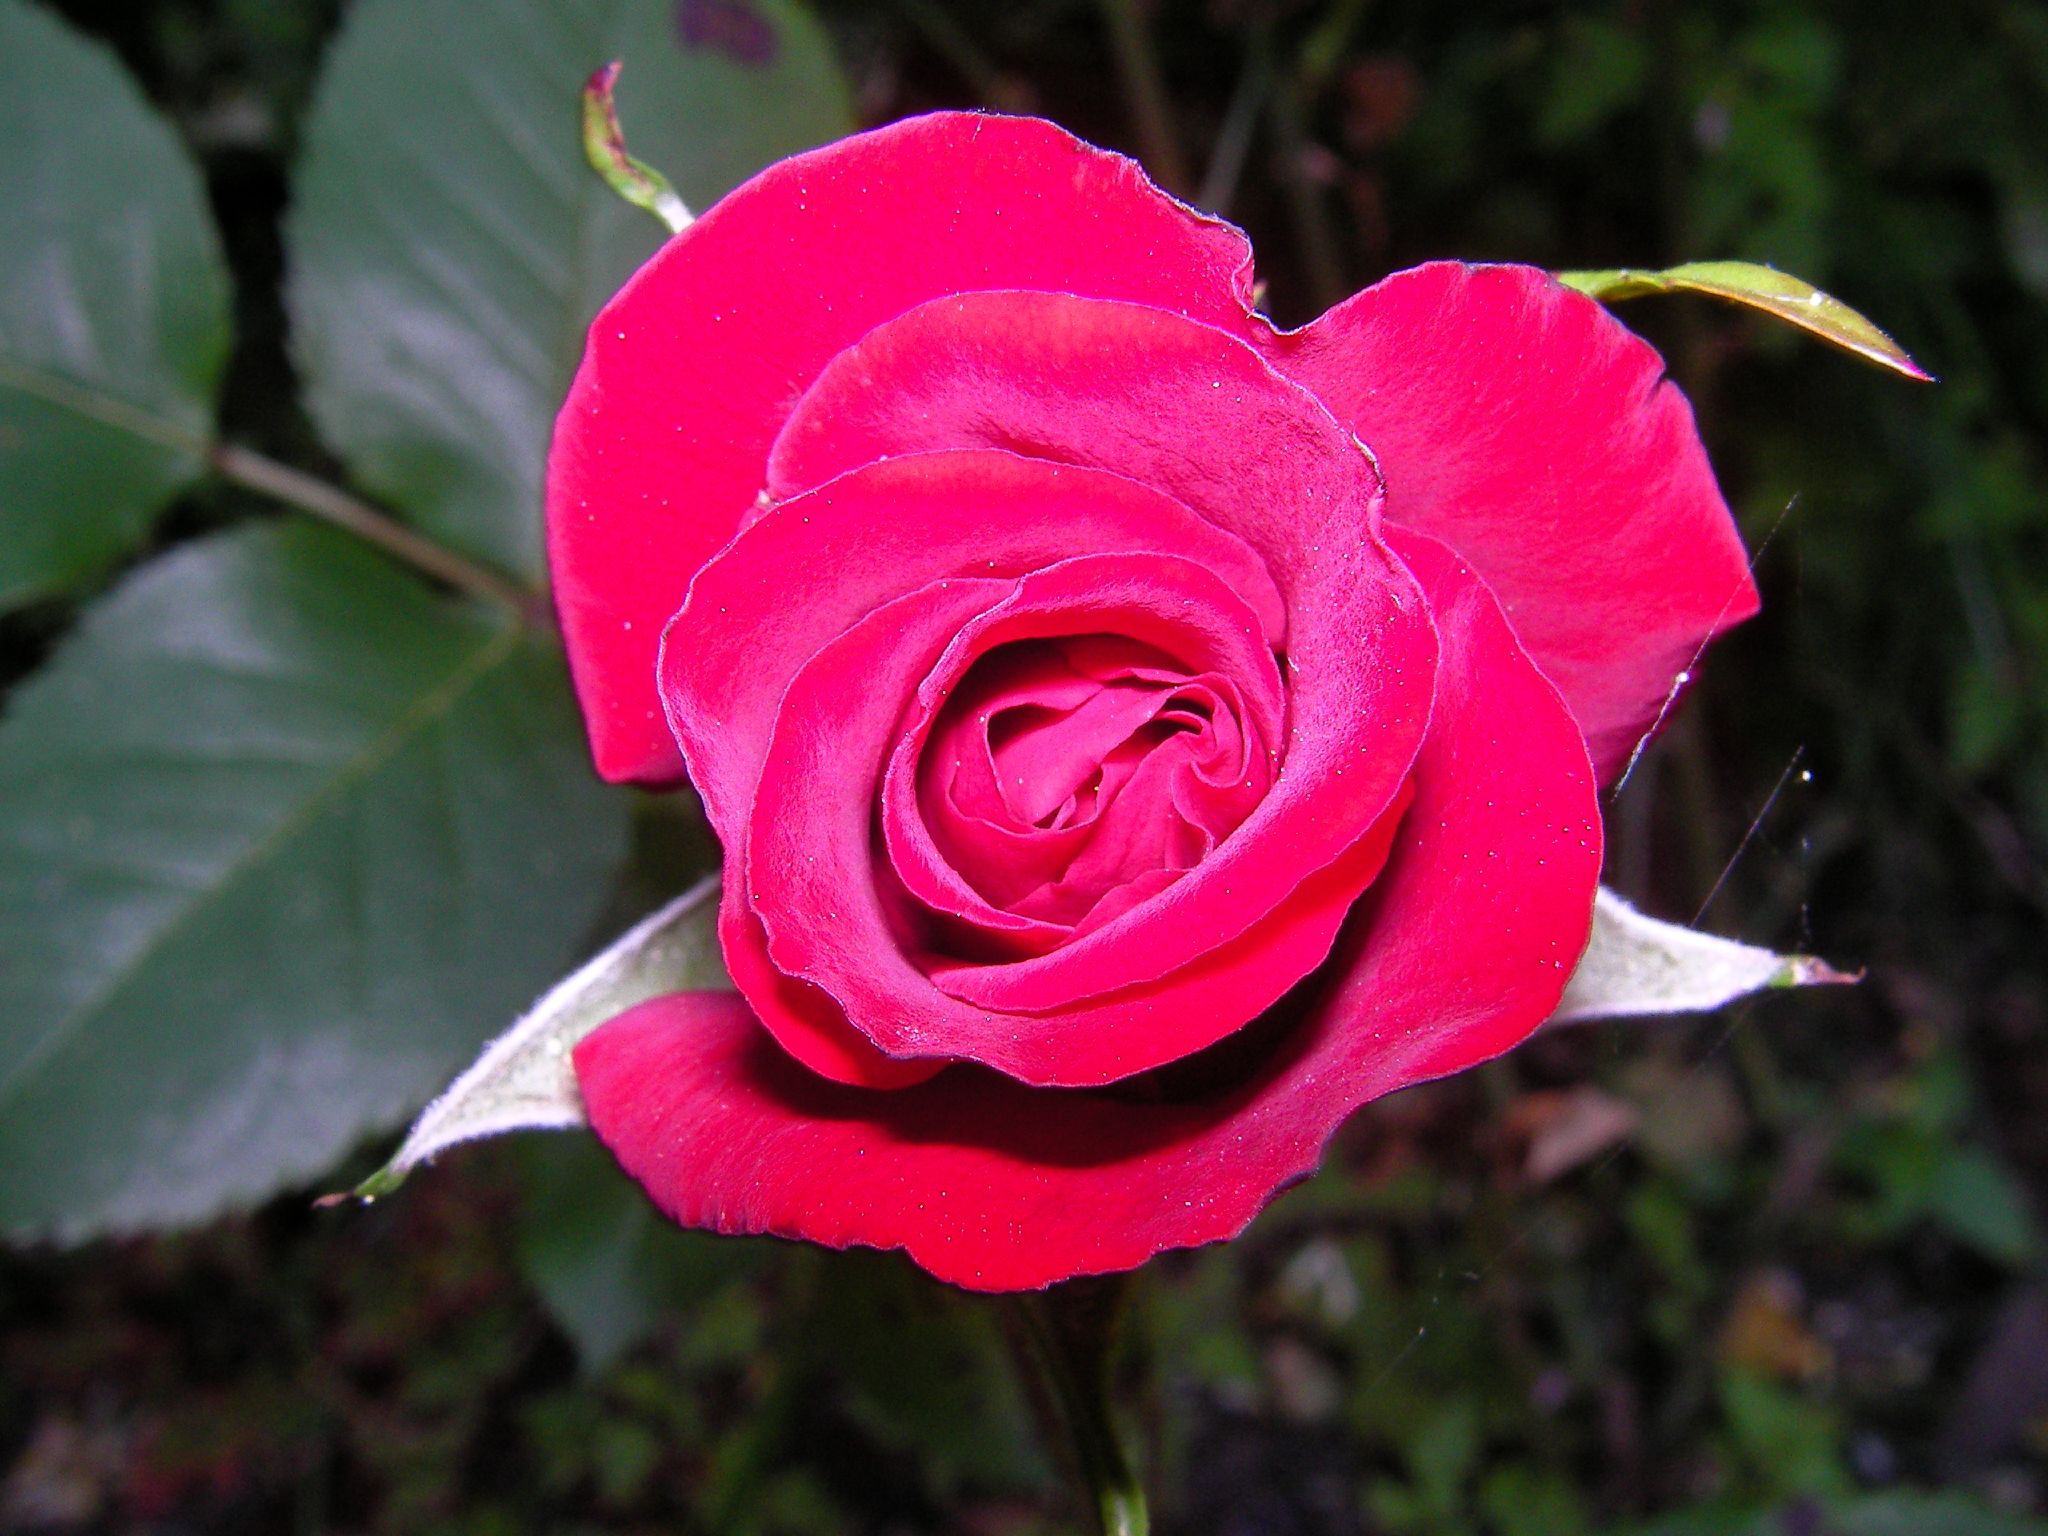 a close up view of a pink rose blooming